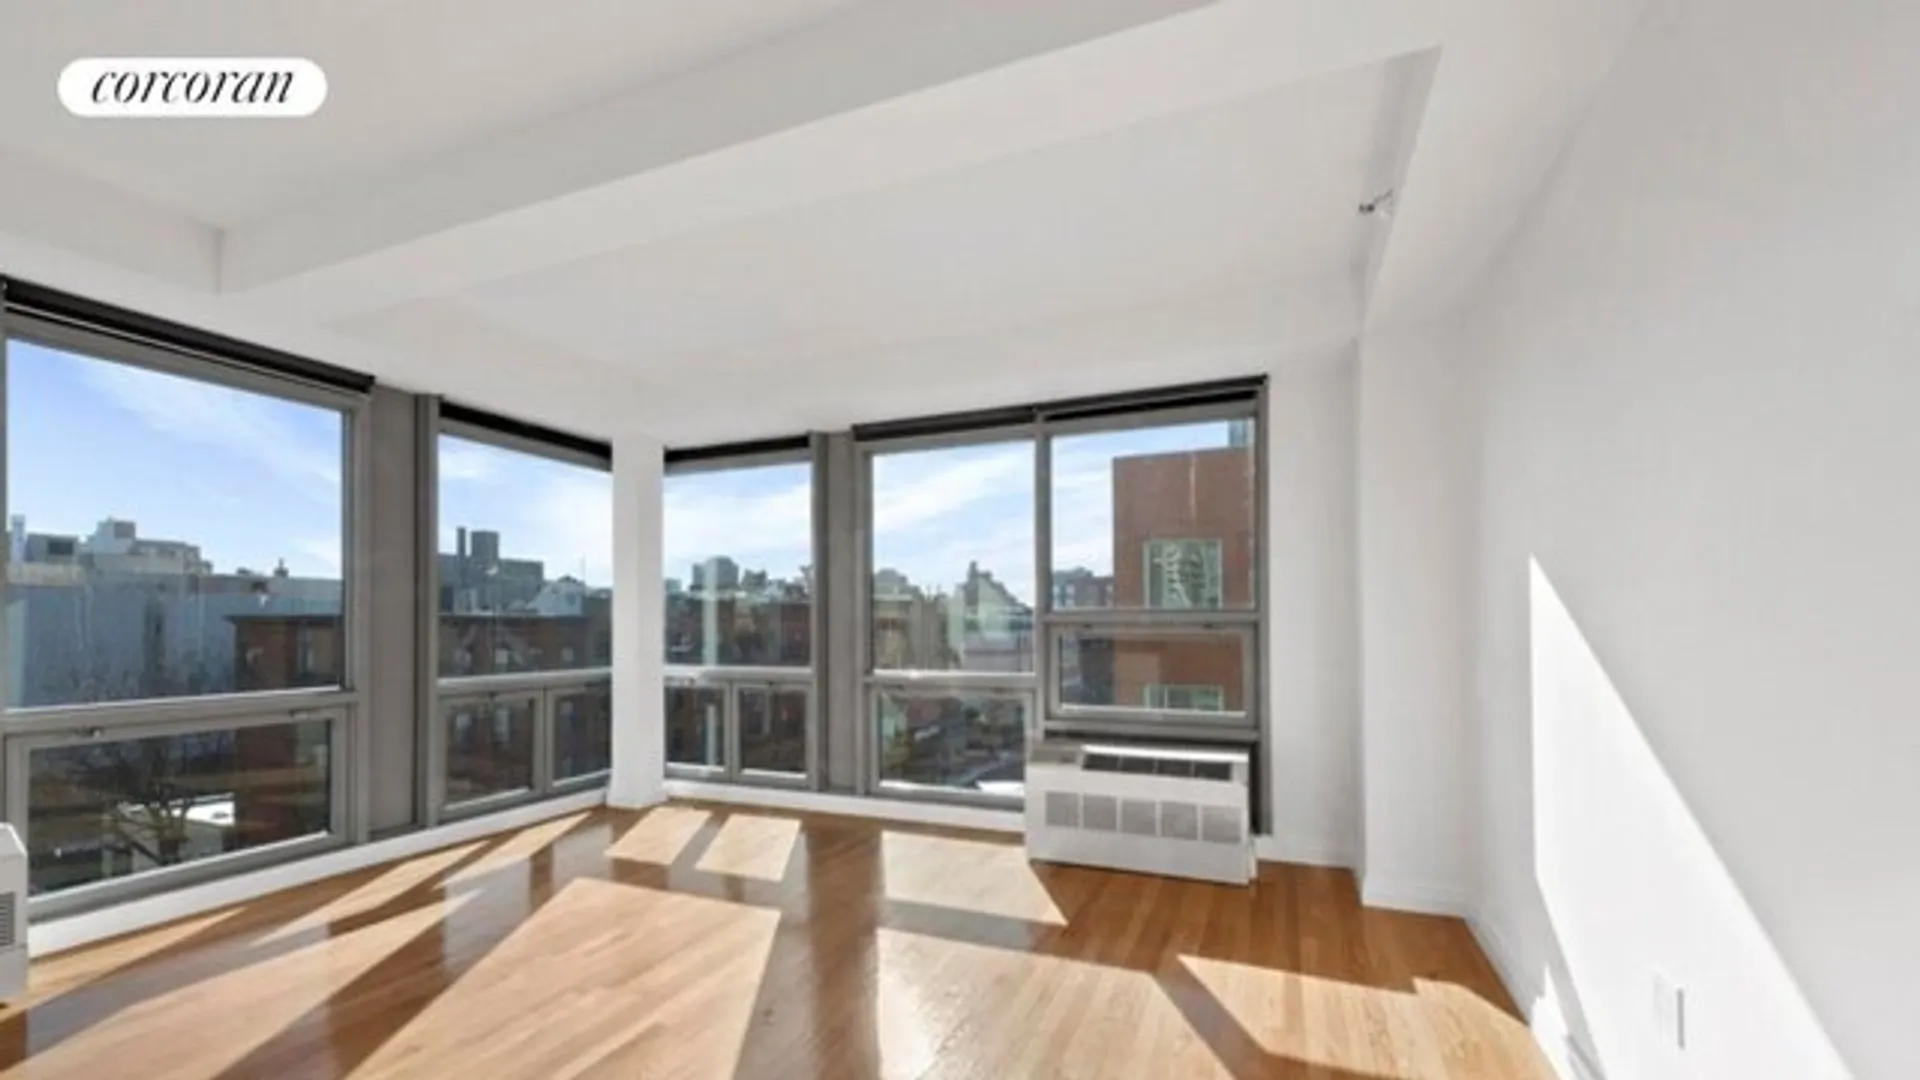 181 East 119th Street, New York, NY 10035, USA | 2 bed apartment for rent